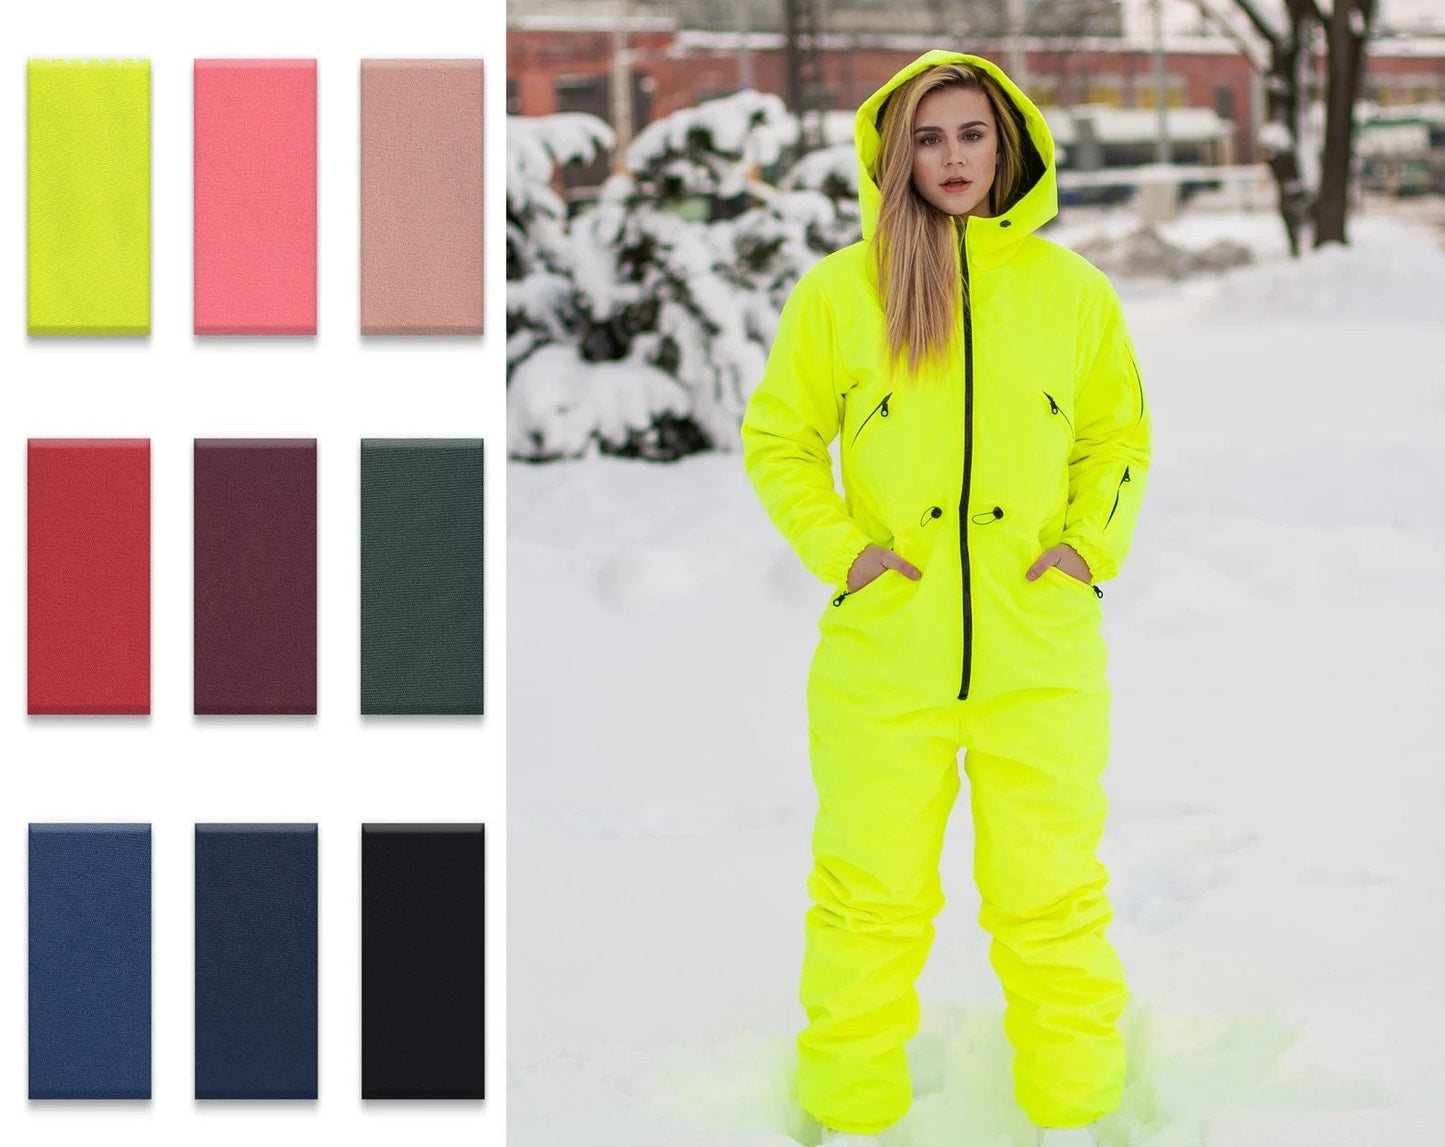 Winter jumpsuit, snowboard clothes, Snowboard suit, Skiing Overall, ski suit women, sportswear, Jumpsuit winter, Colorful Snow Suit,